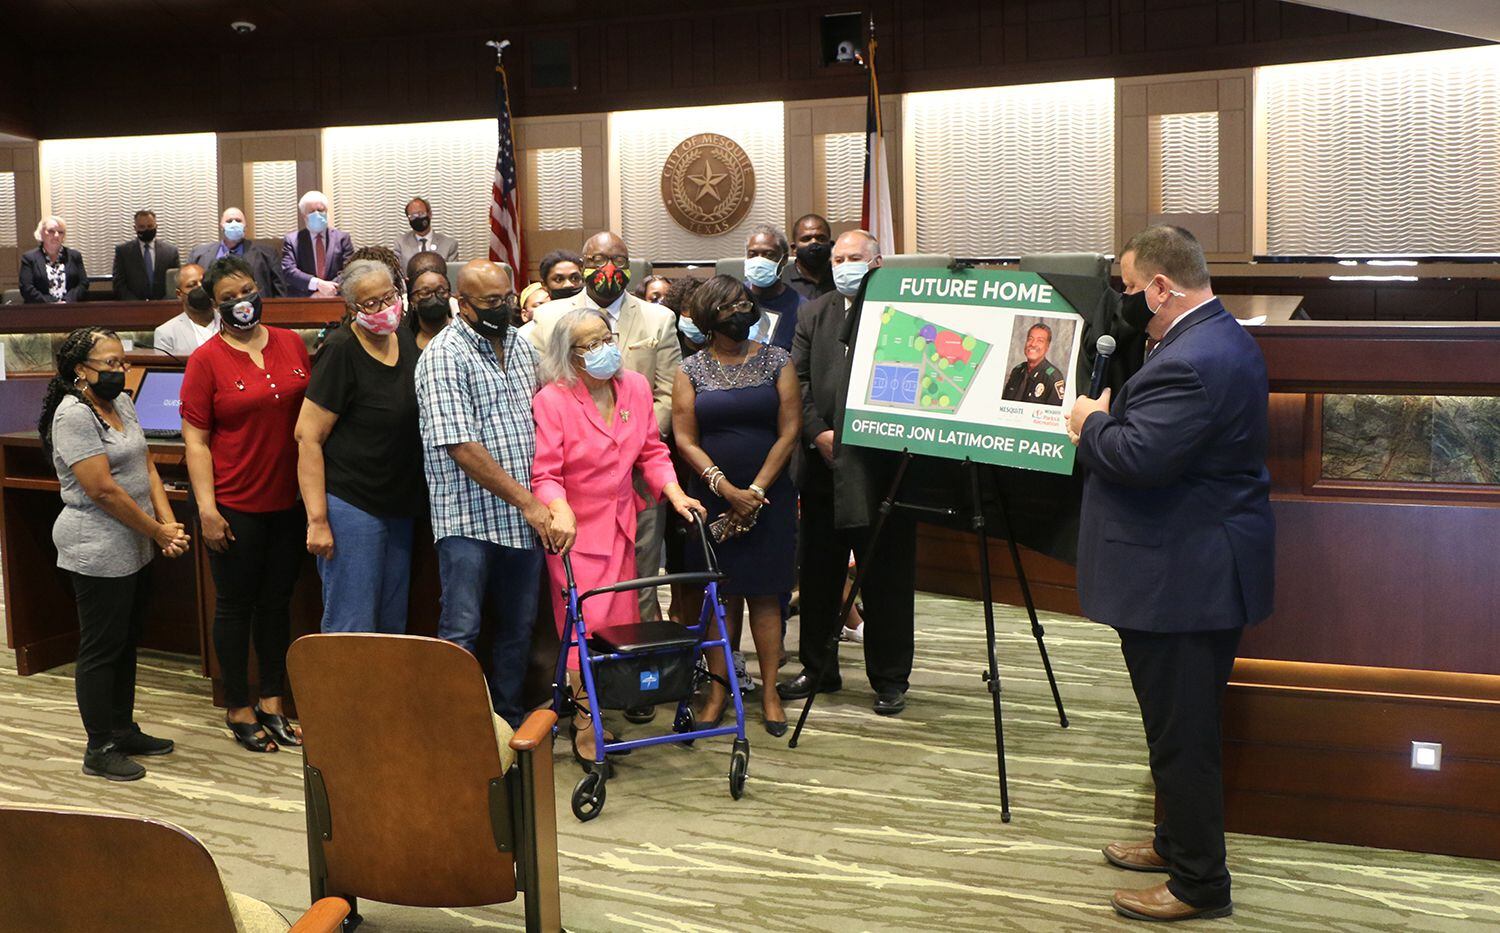 Mayor Bruce Archer presents plans for Jon Latimore park to the late police officer's family...